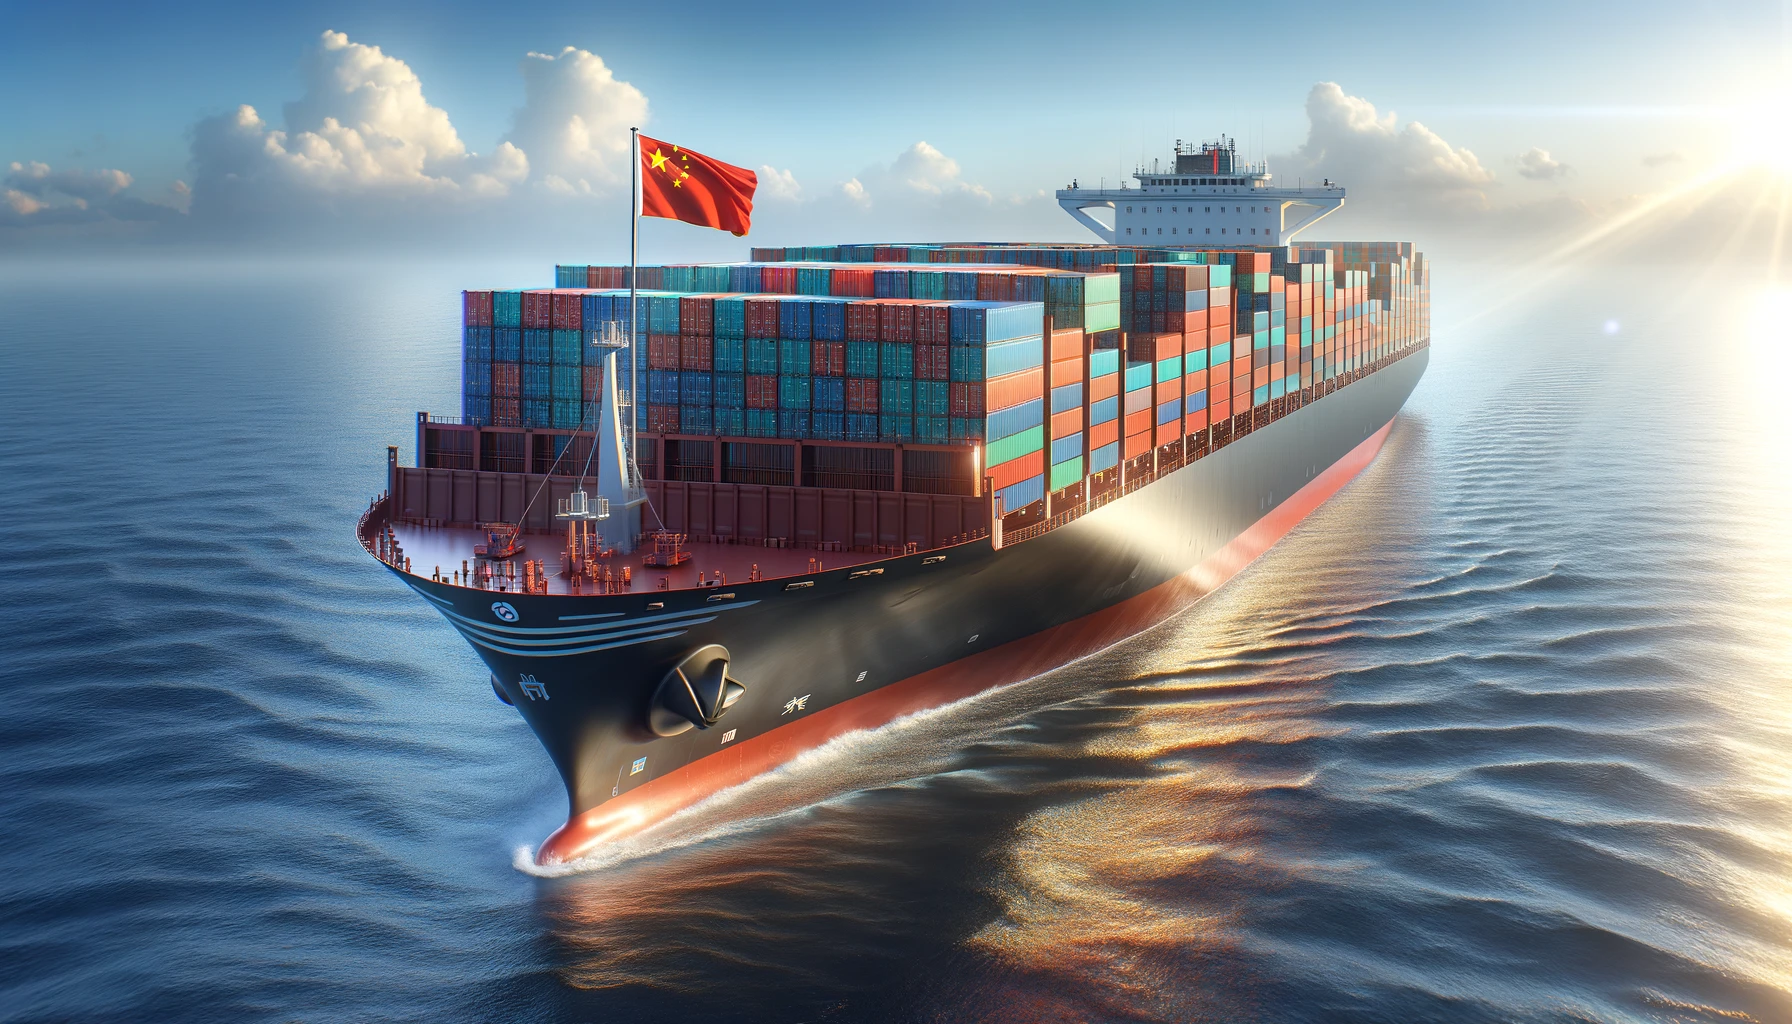 -A-photorealistic-image-of-a-large-container-ship-flying-the-flag-of-the-Peoples-Republic-of-China.-The-ship-is-massive-with-rows-of-colorful-contain